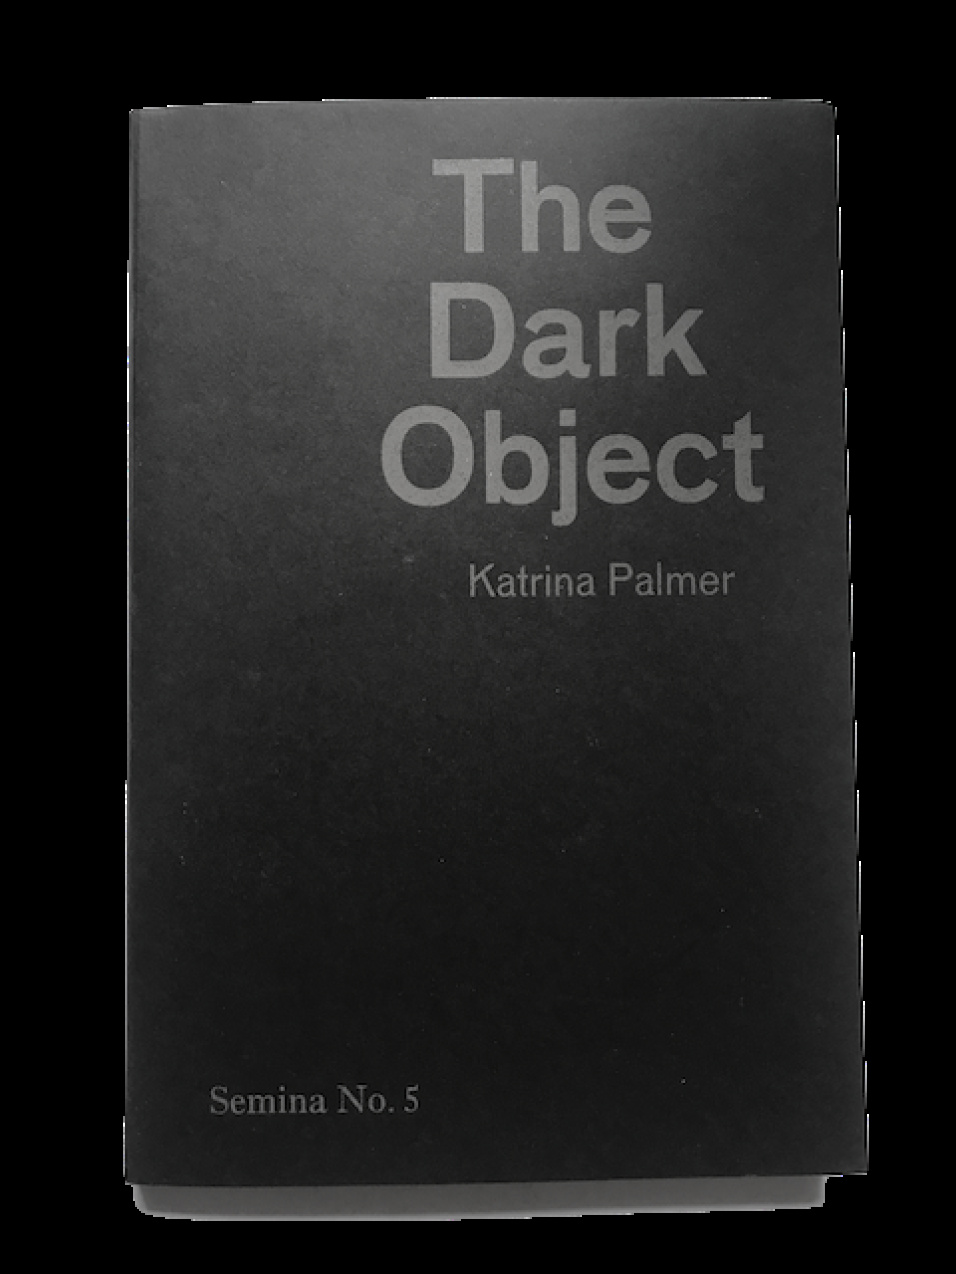 The Dark Object (publication)